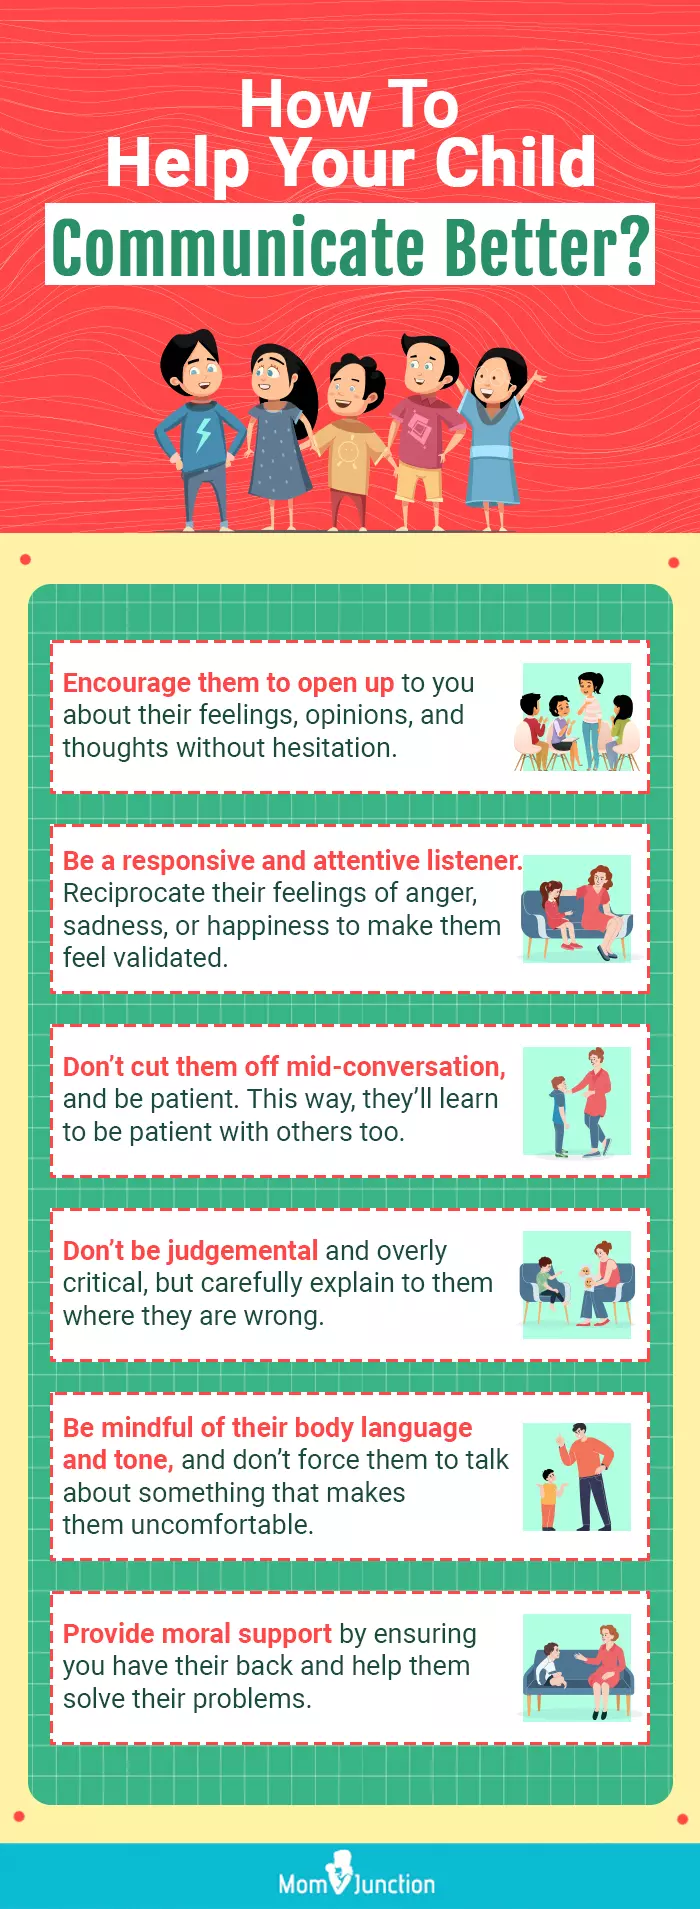 how to help your child communicate better (infographic)